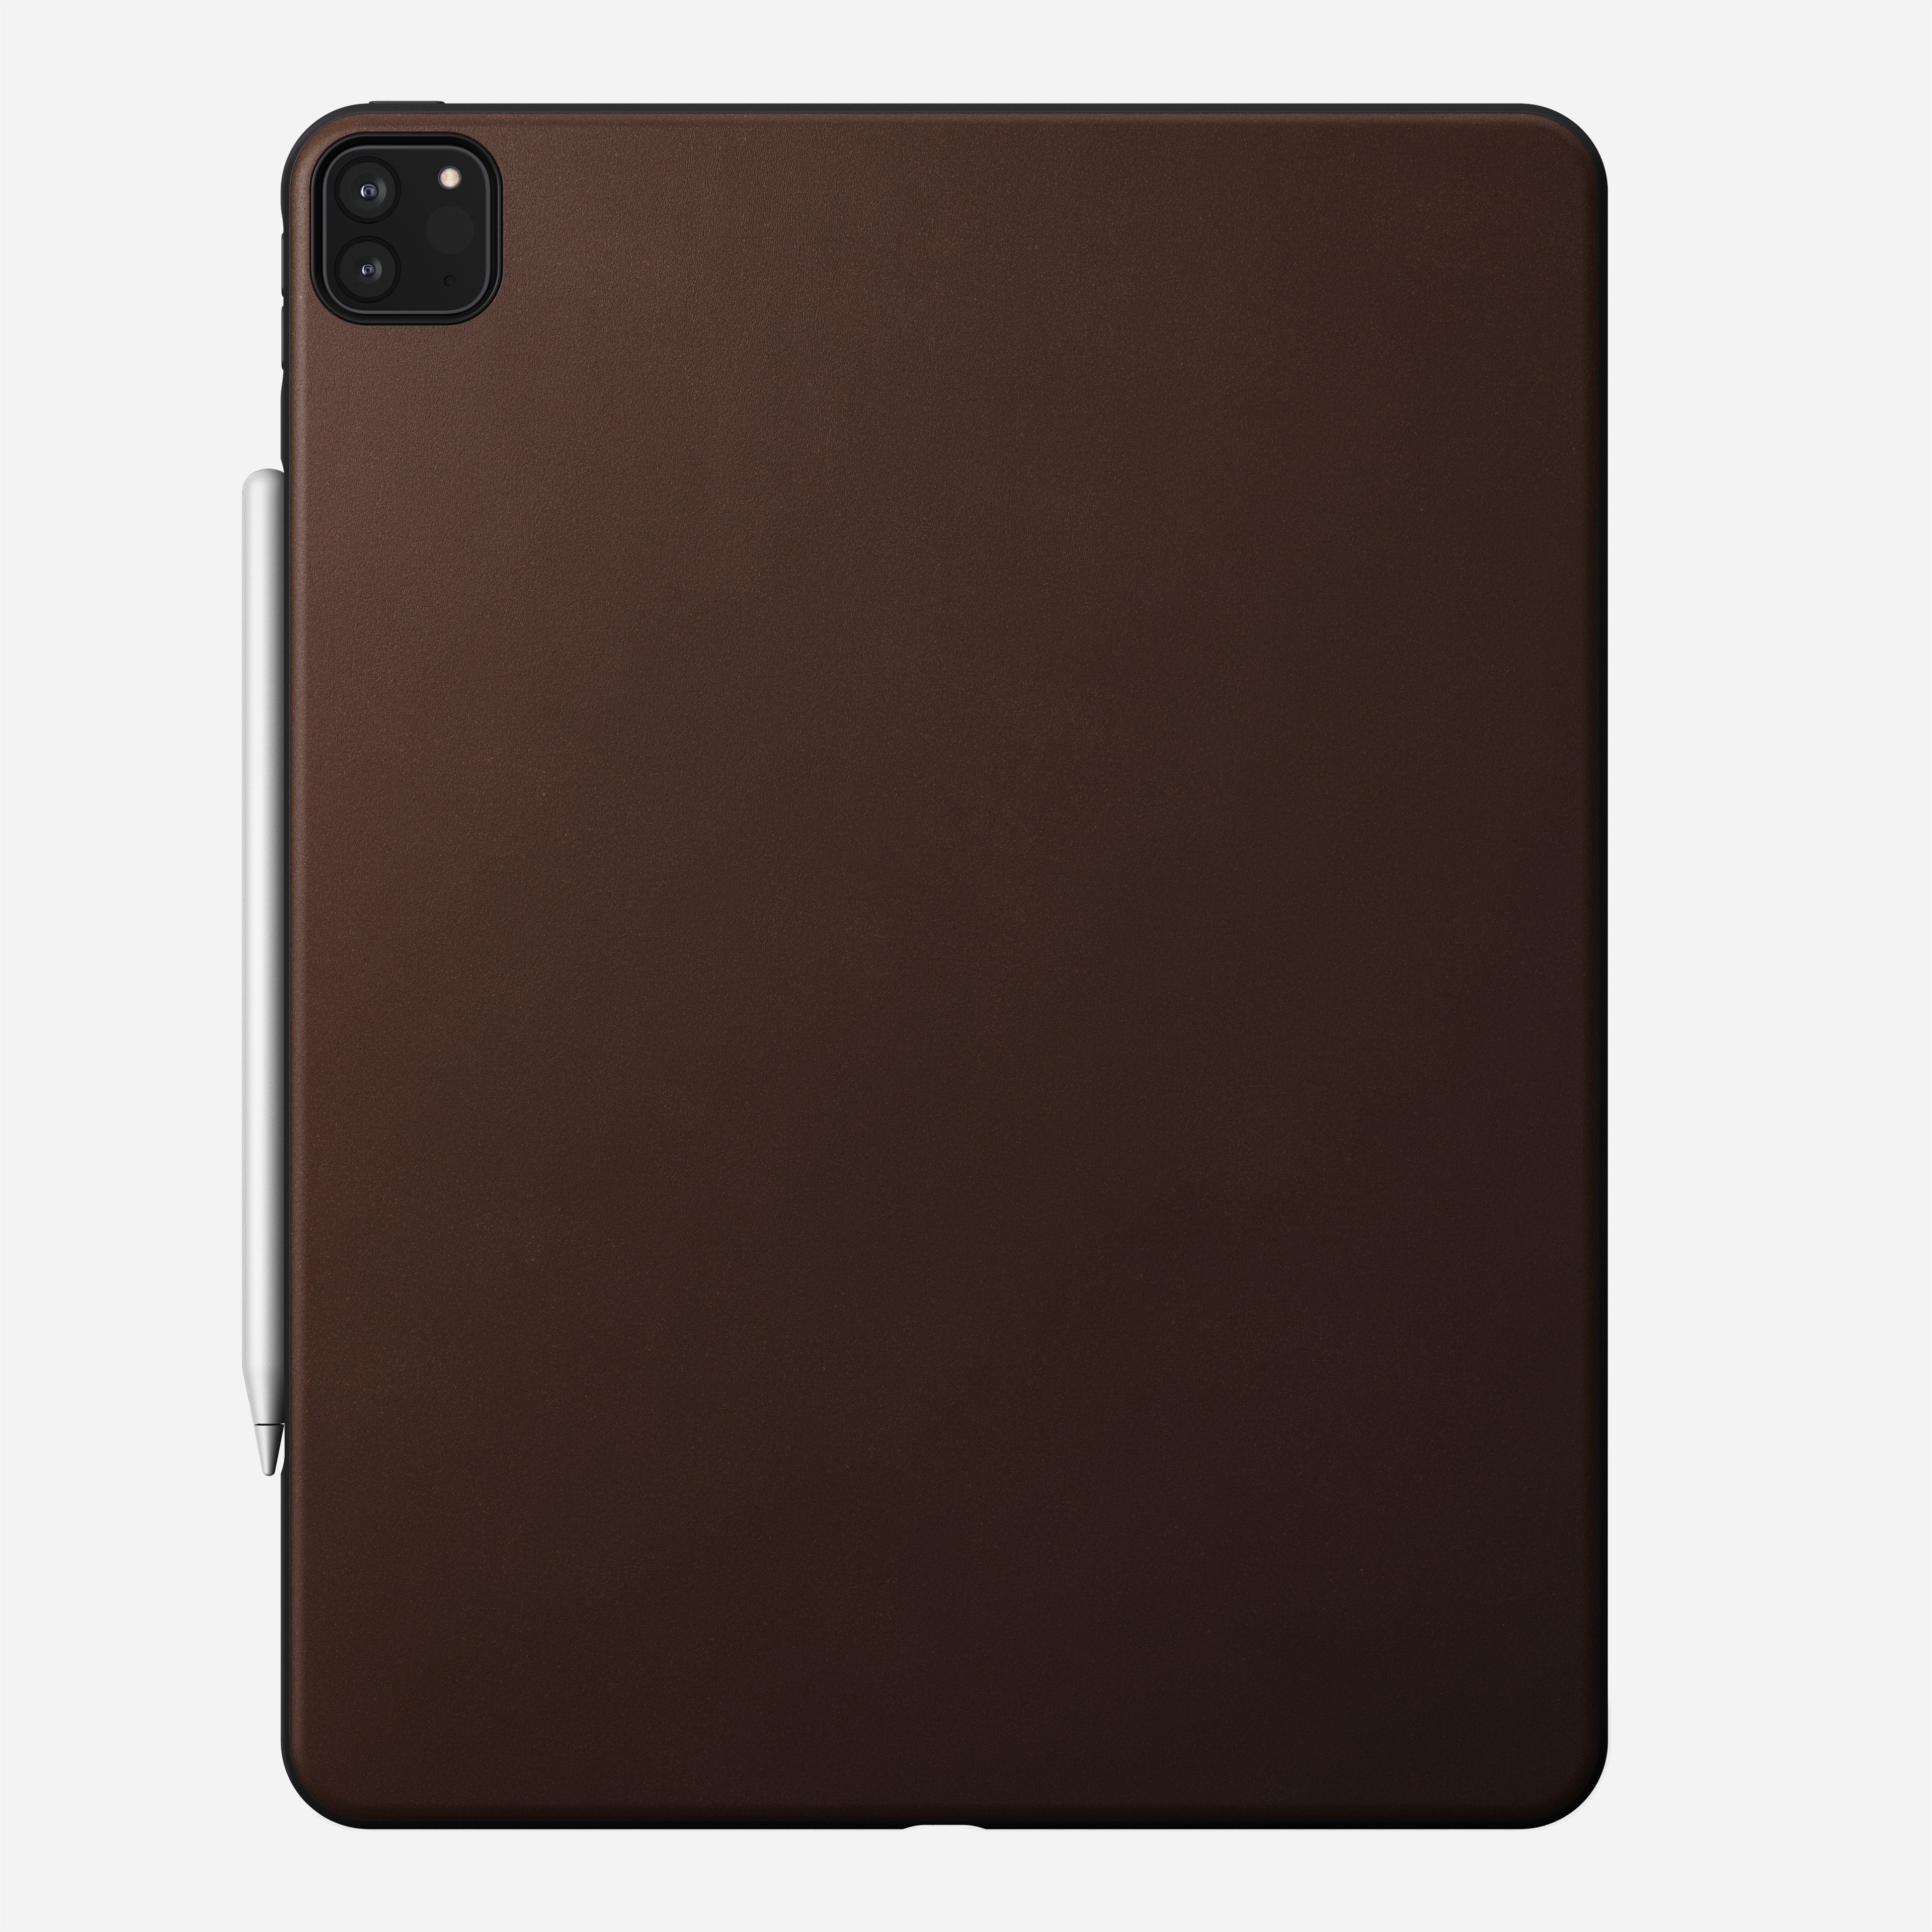 Modern Leather Case - iPad Pro 12.9 (5th Gen) | Rustic Brown | Leather